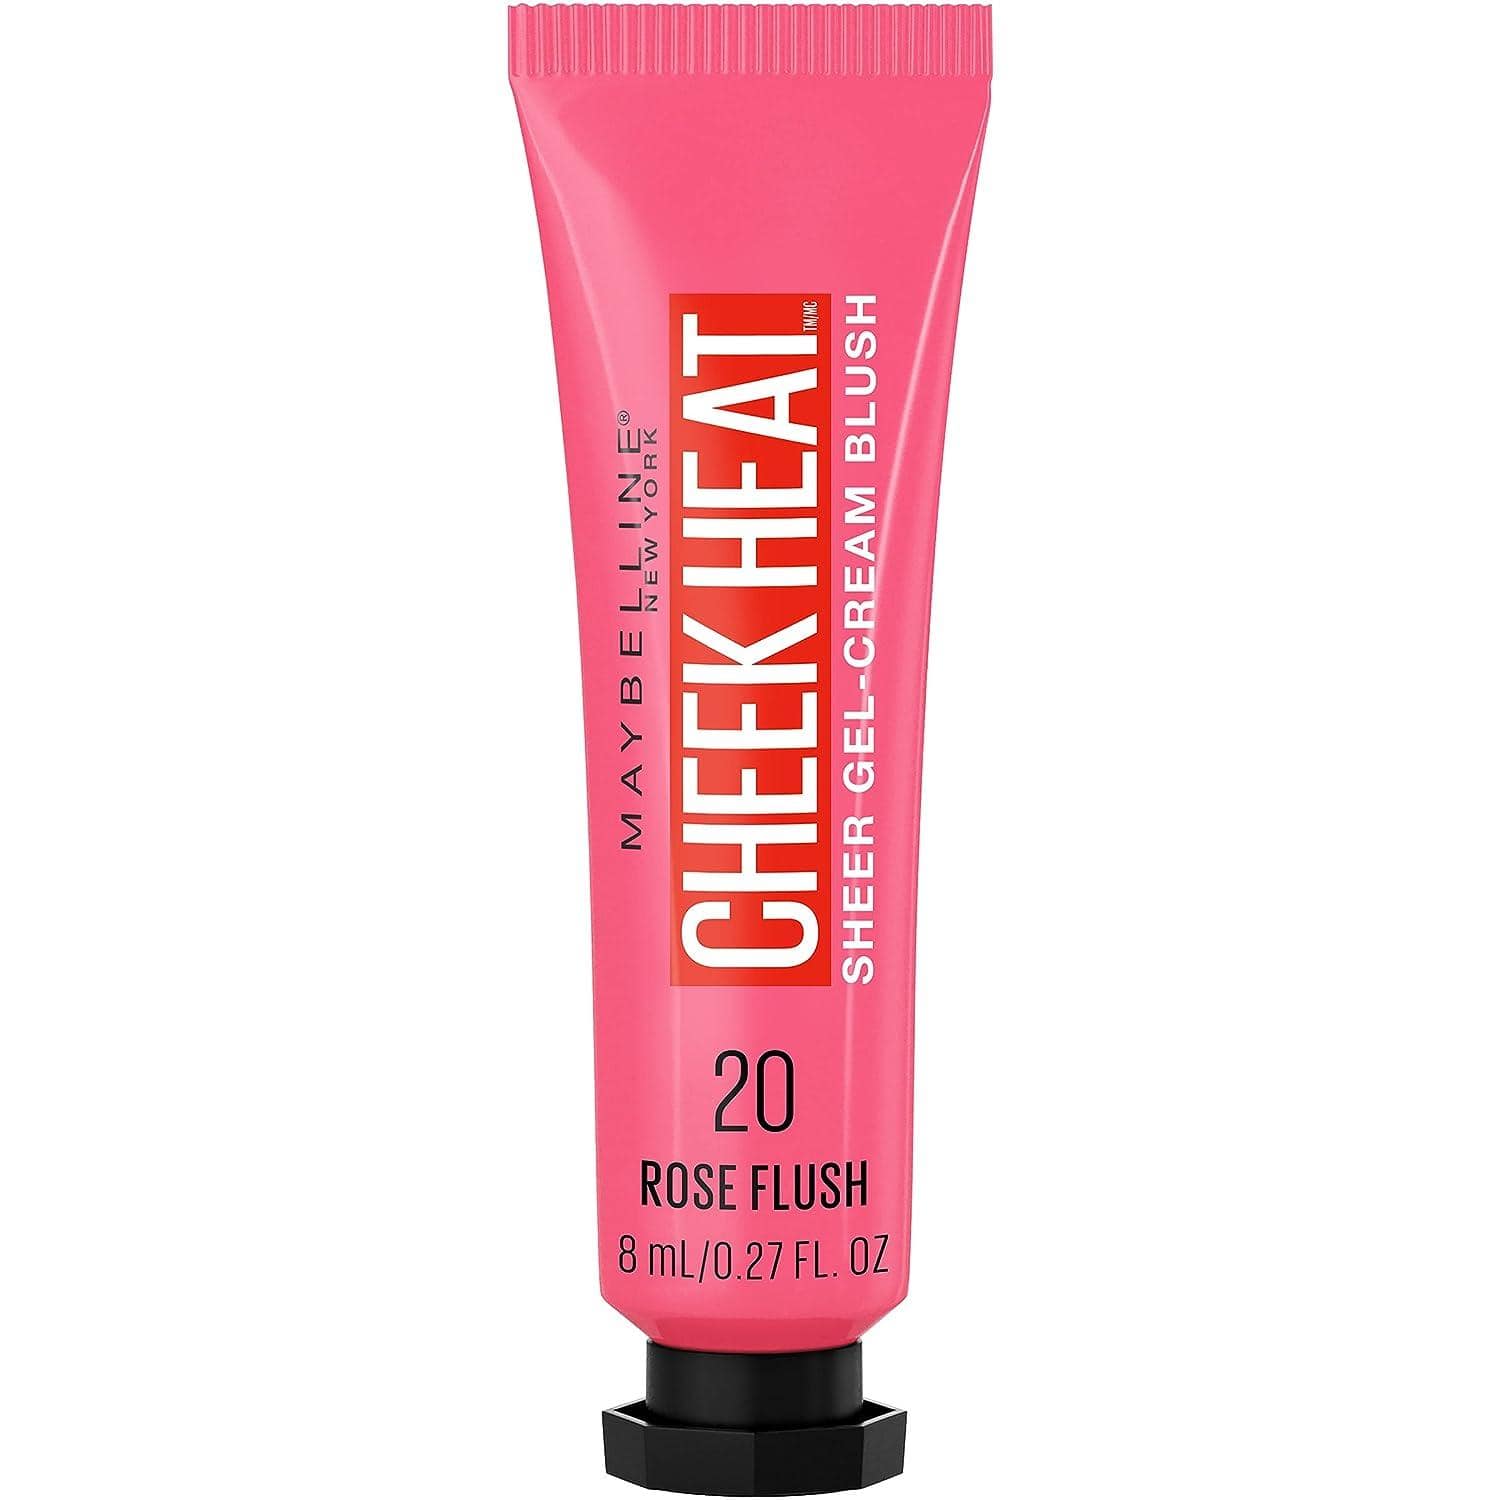 Maybelline's Cheek Heat Gel-Cream Blush, my budget-friendly go-to, charms with its lightweight texture for an effortlessly applied, natural-looking flush with a dewy finish.